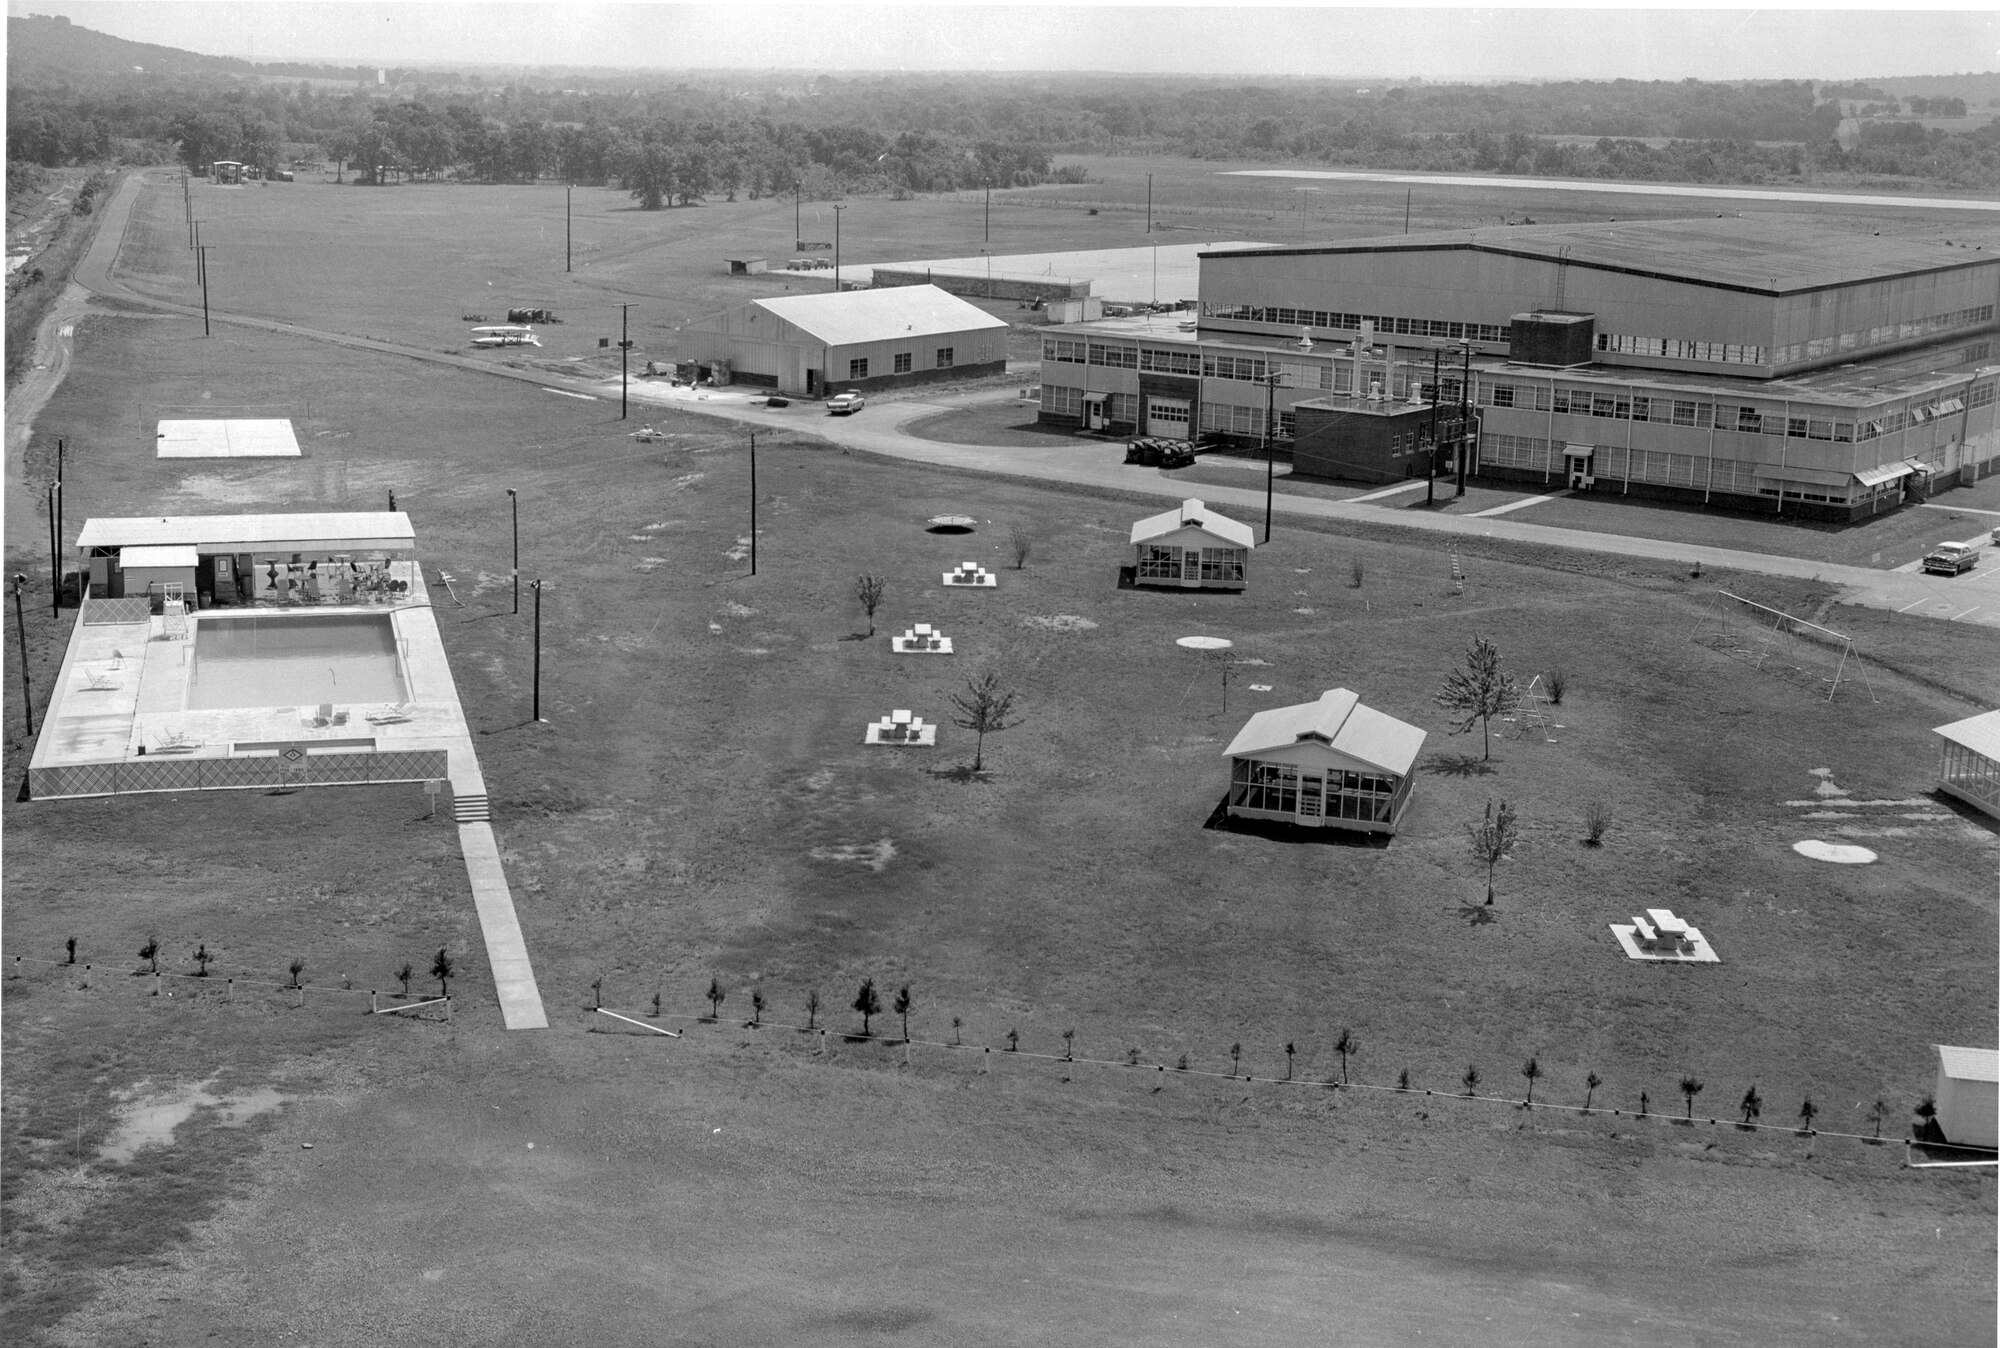 This image features an aerial view of Ebbing Air National Guard Base, Fort Smith, Arkansas when it had a recreational area between the hangar and the pool. Since then, the recreational area has been replaced by the 188th Medical Group/188th Communications Flight building. (Courtesy photo)